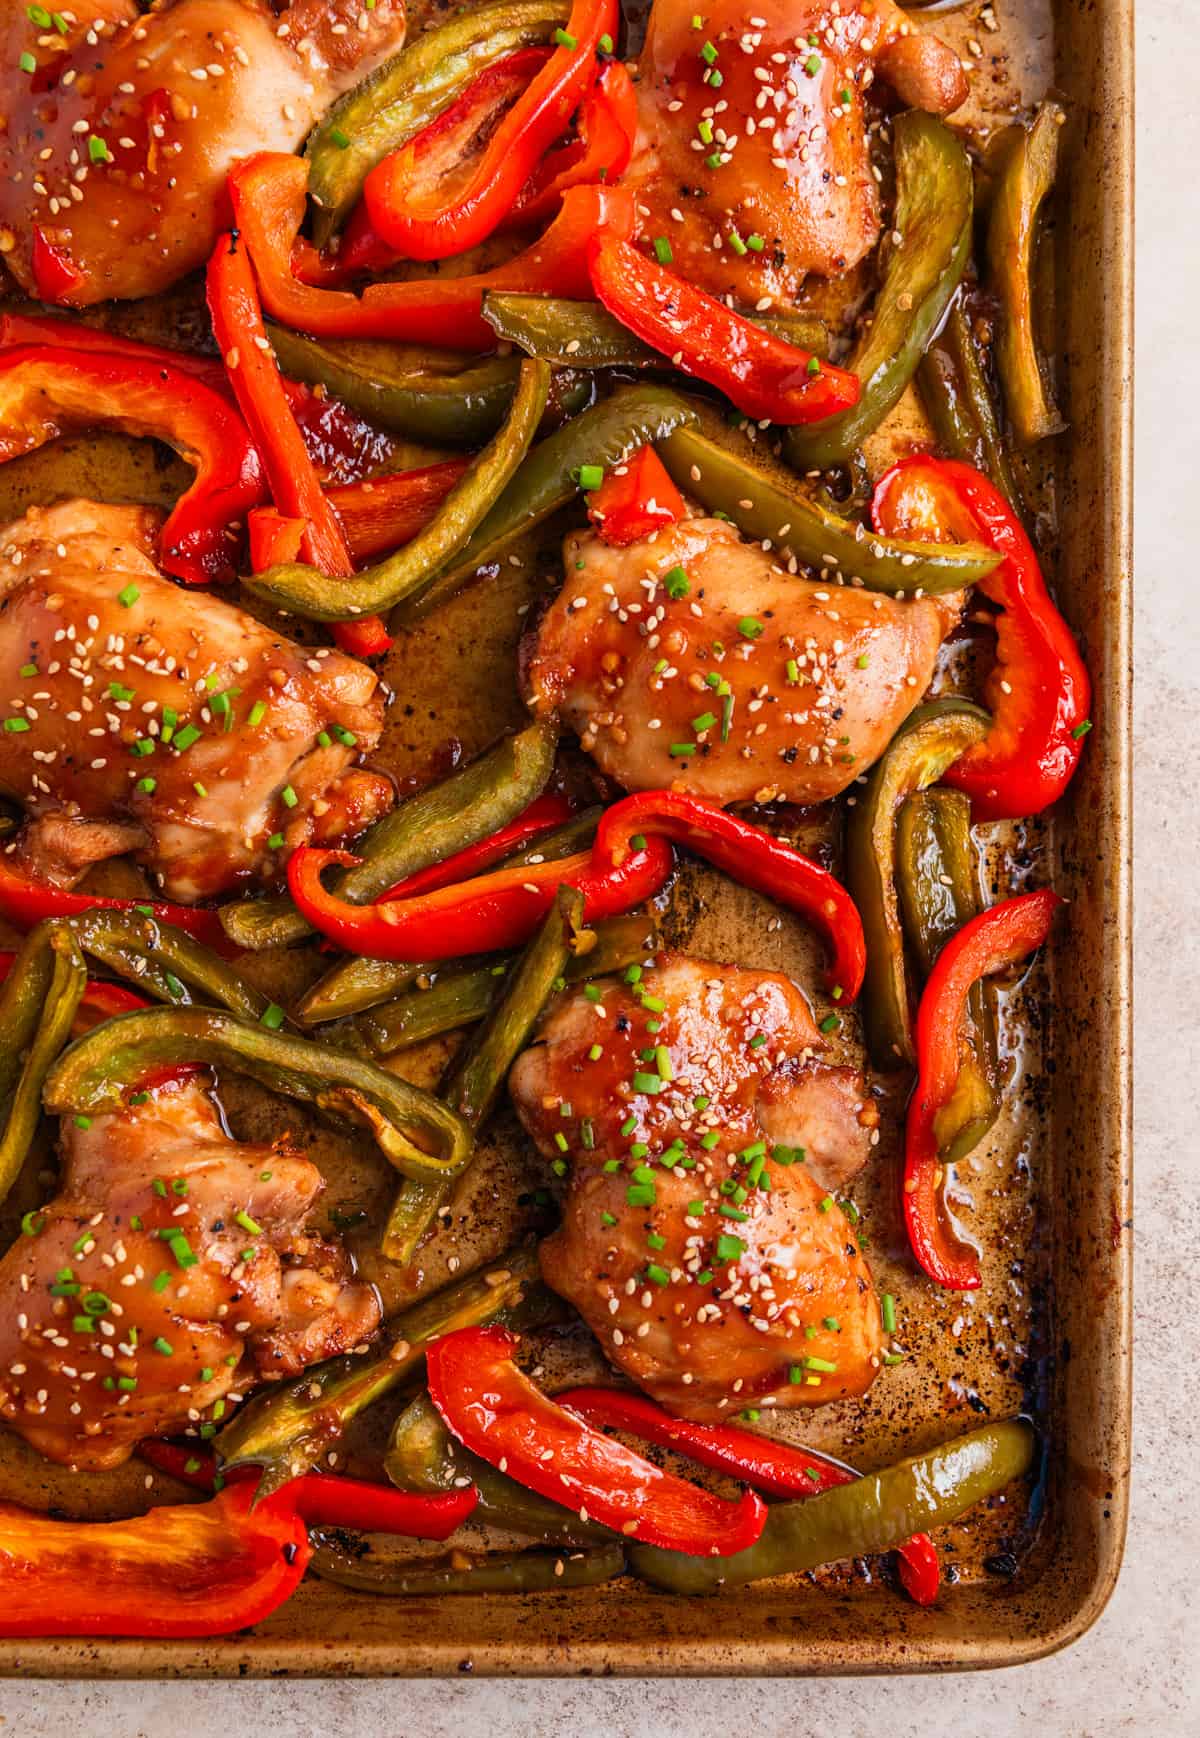 Chicken thighs and red and green bell peppers baked on sheet pan and topped with chives and sesame seeds.